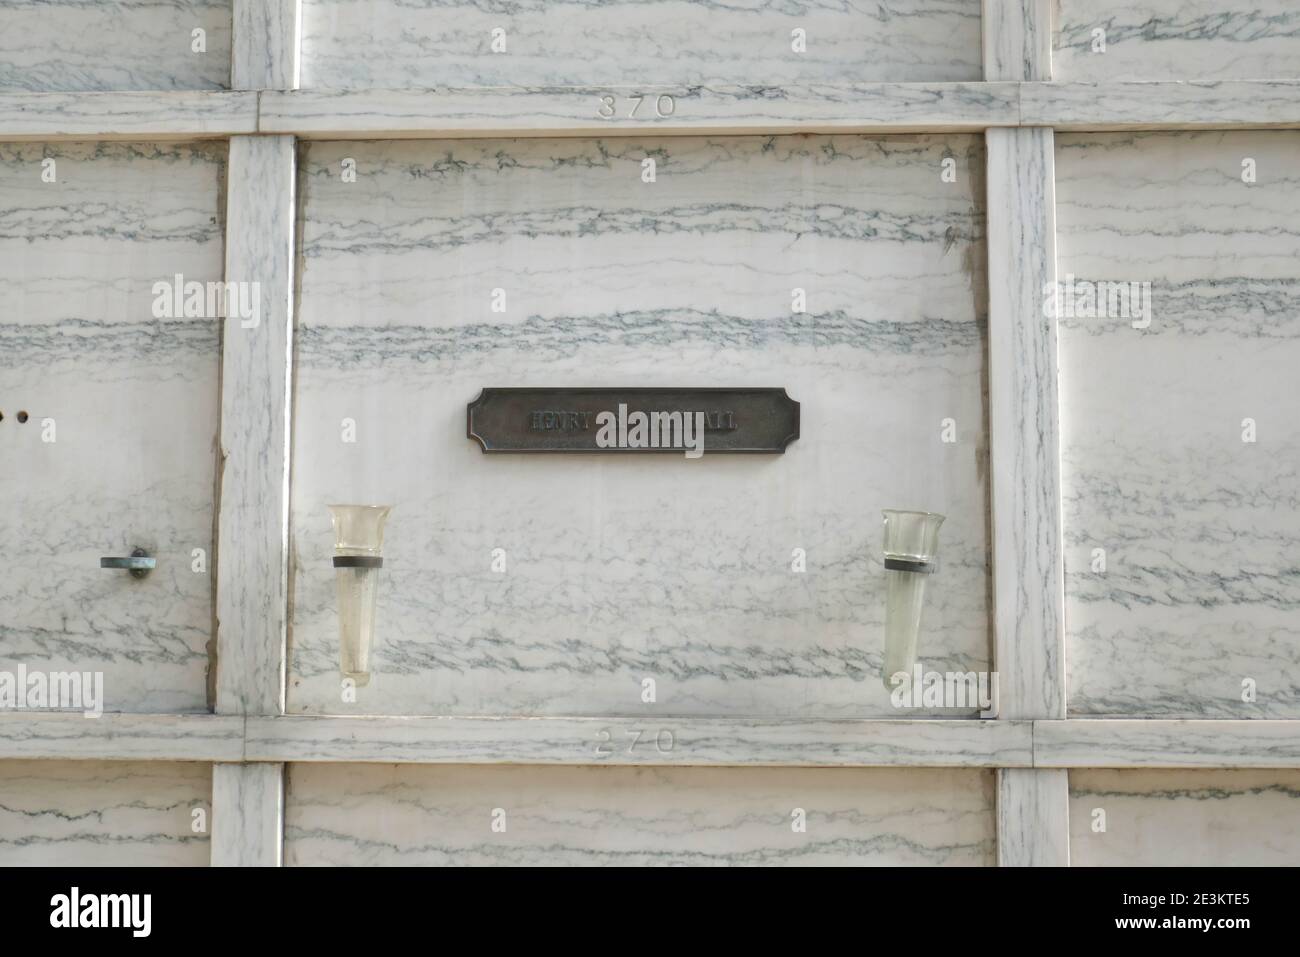 Los Angeles, California, USA 17th January 2021 A general view of atmosphere of actor Henry B. Walthall's Grave in Abbey of the Psalms at Hollywood Forever Cemetery on January 17, 2021 in Los Angeles, California, USA. Photo by Barry King/Alamy Stock Photo Stock Photo